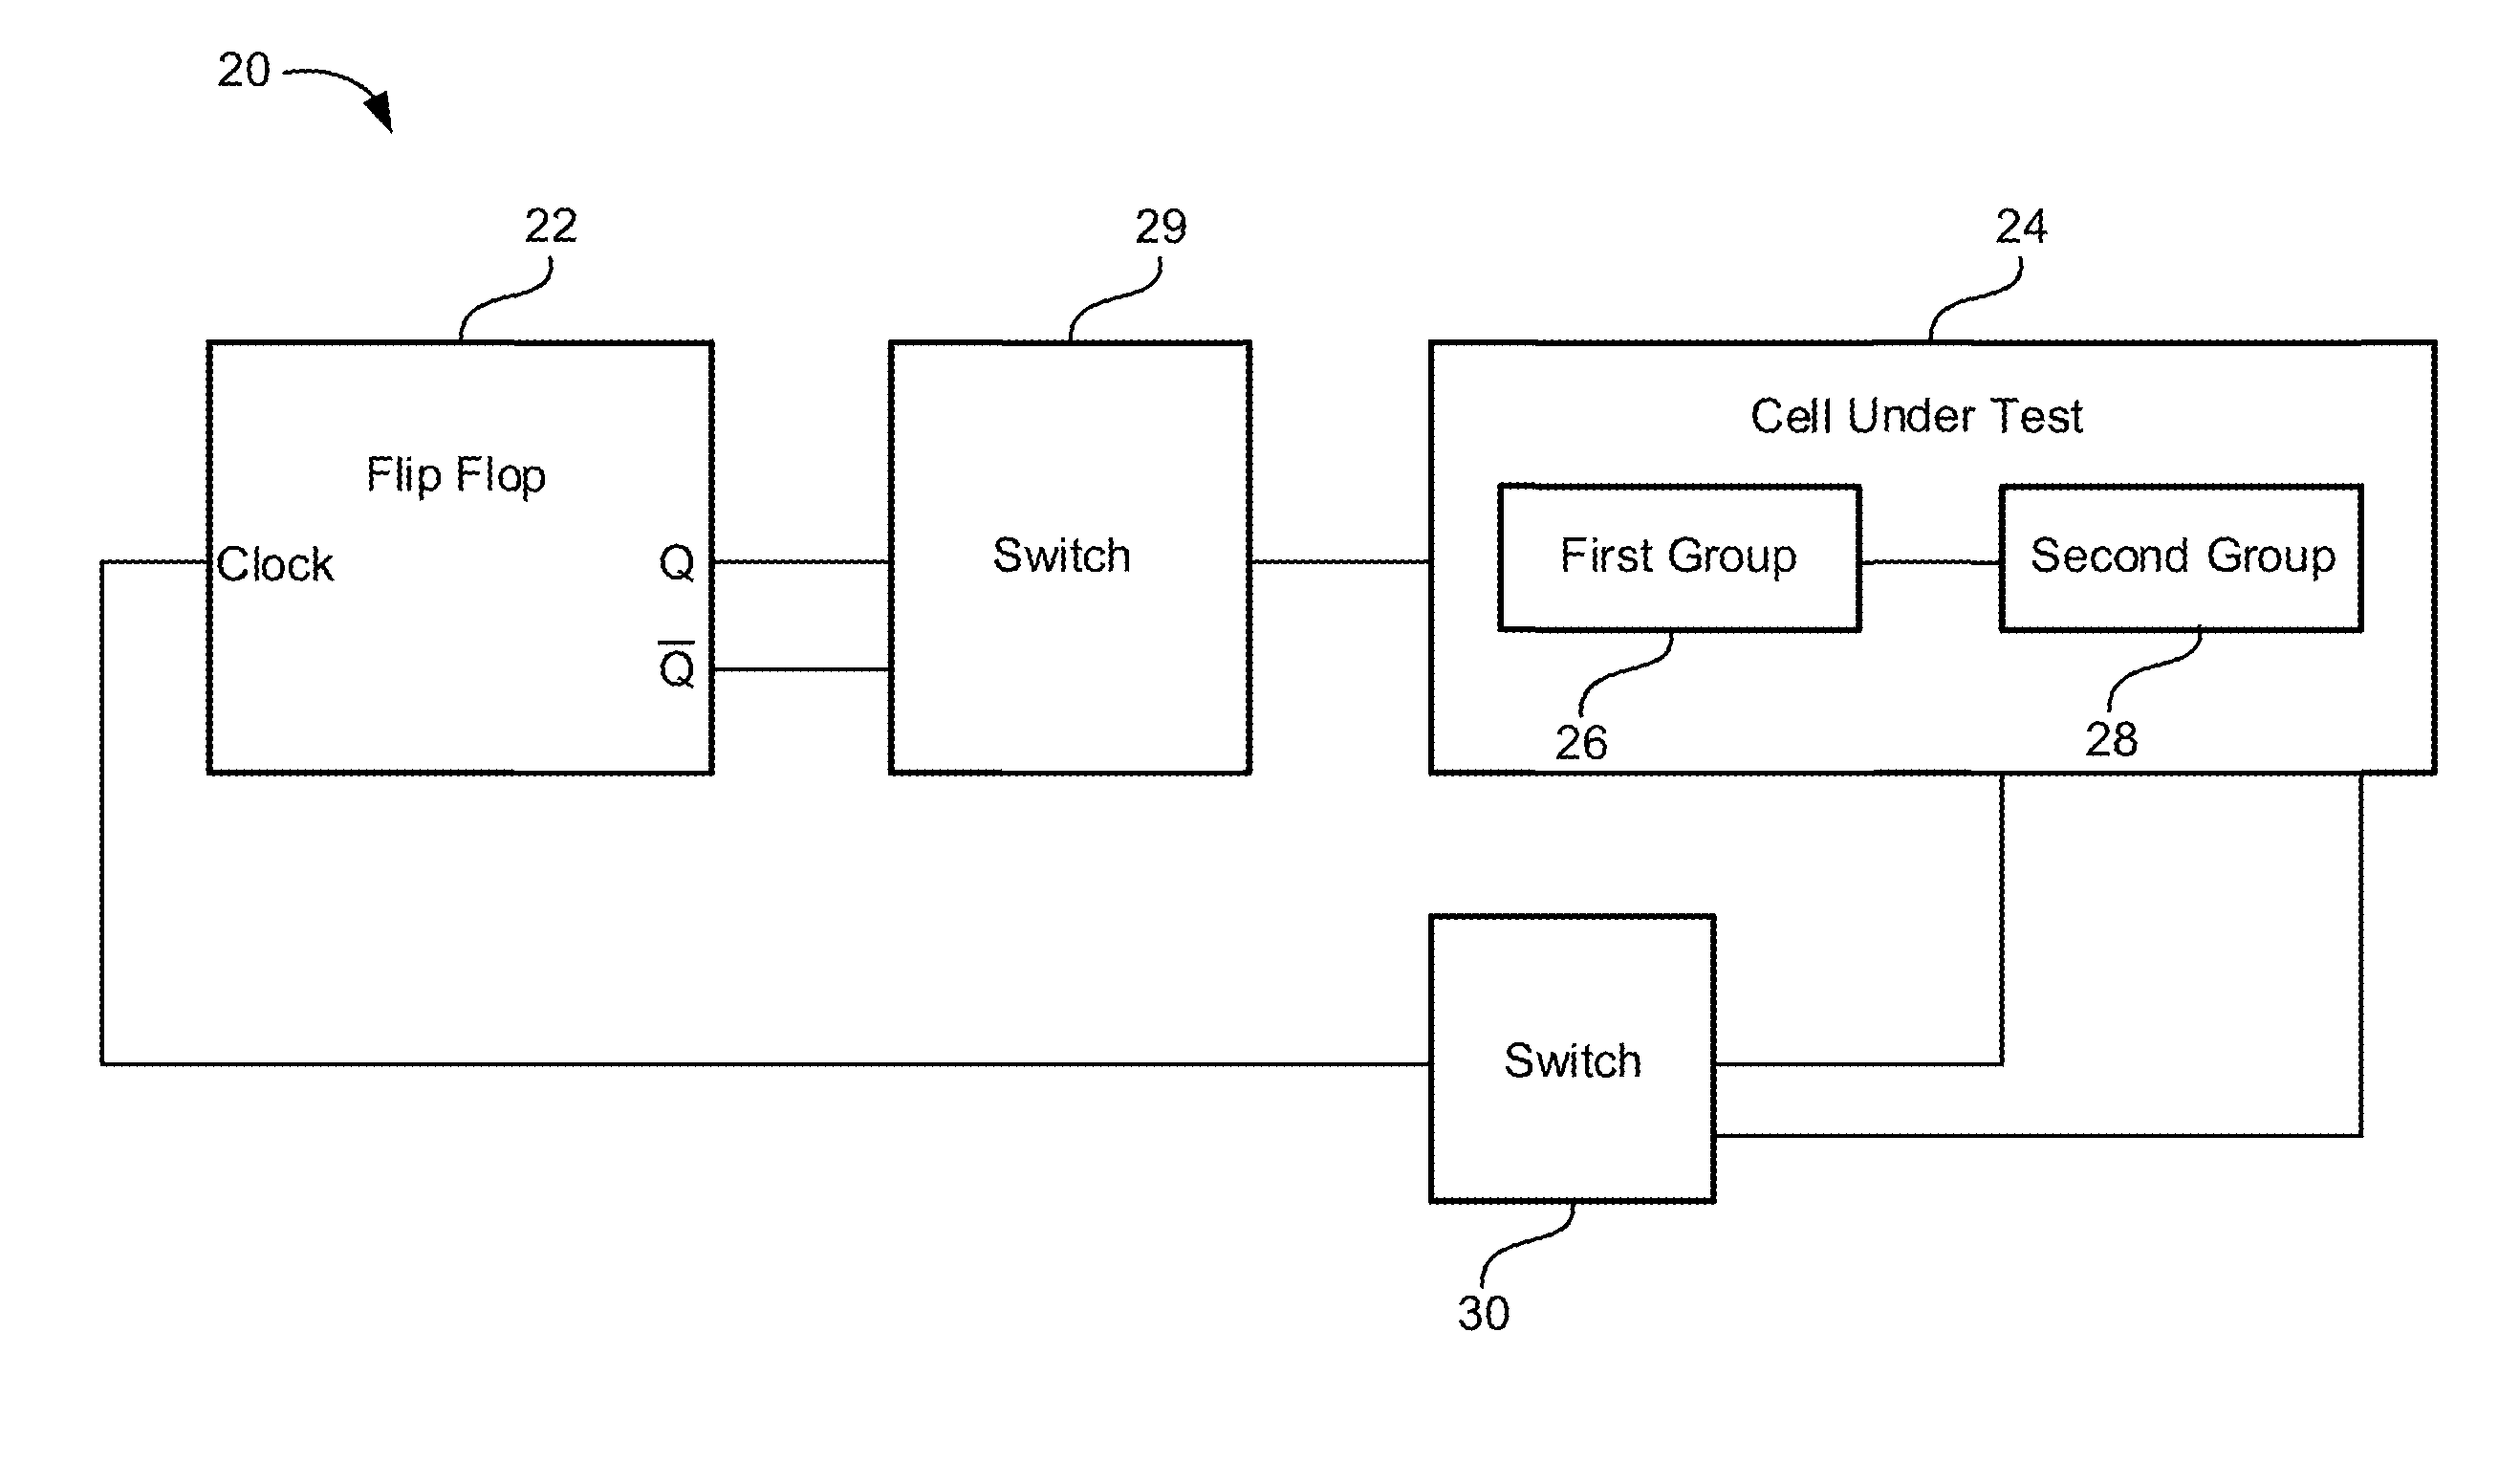 Scheme to measure individually rise and fall delays of non-inverting logic cells